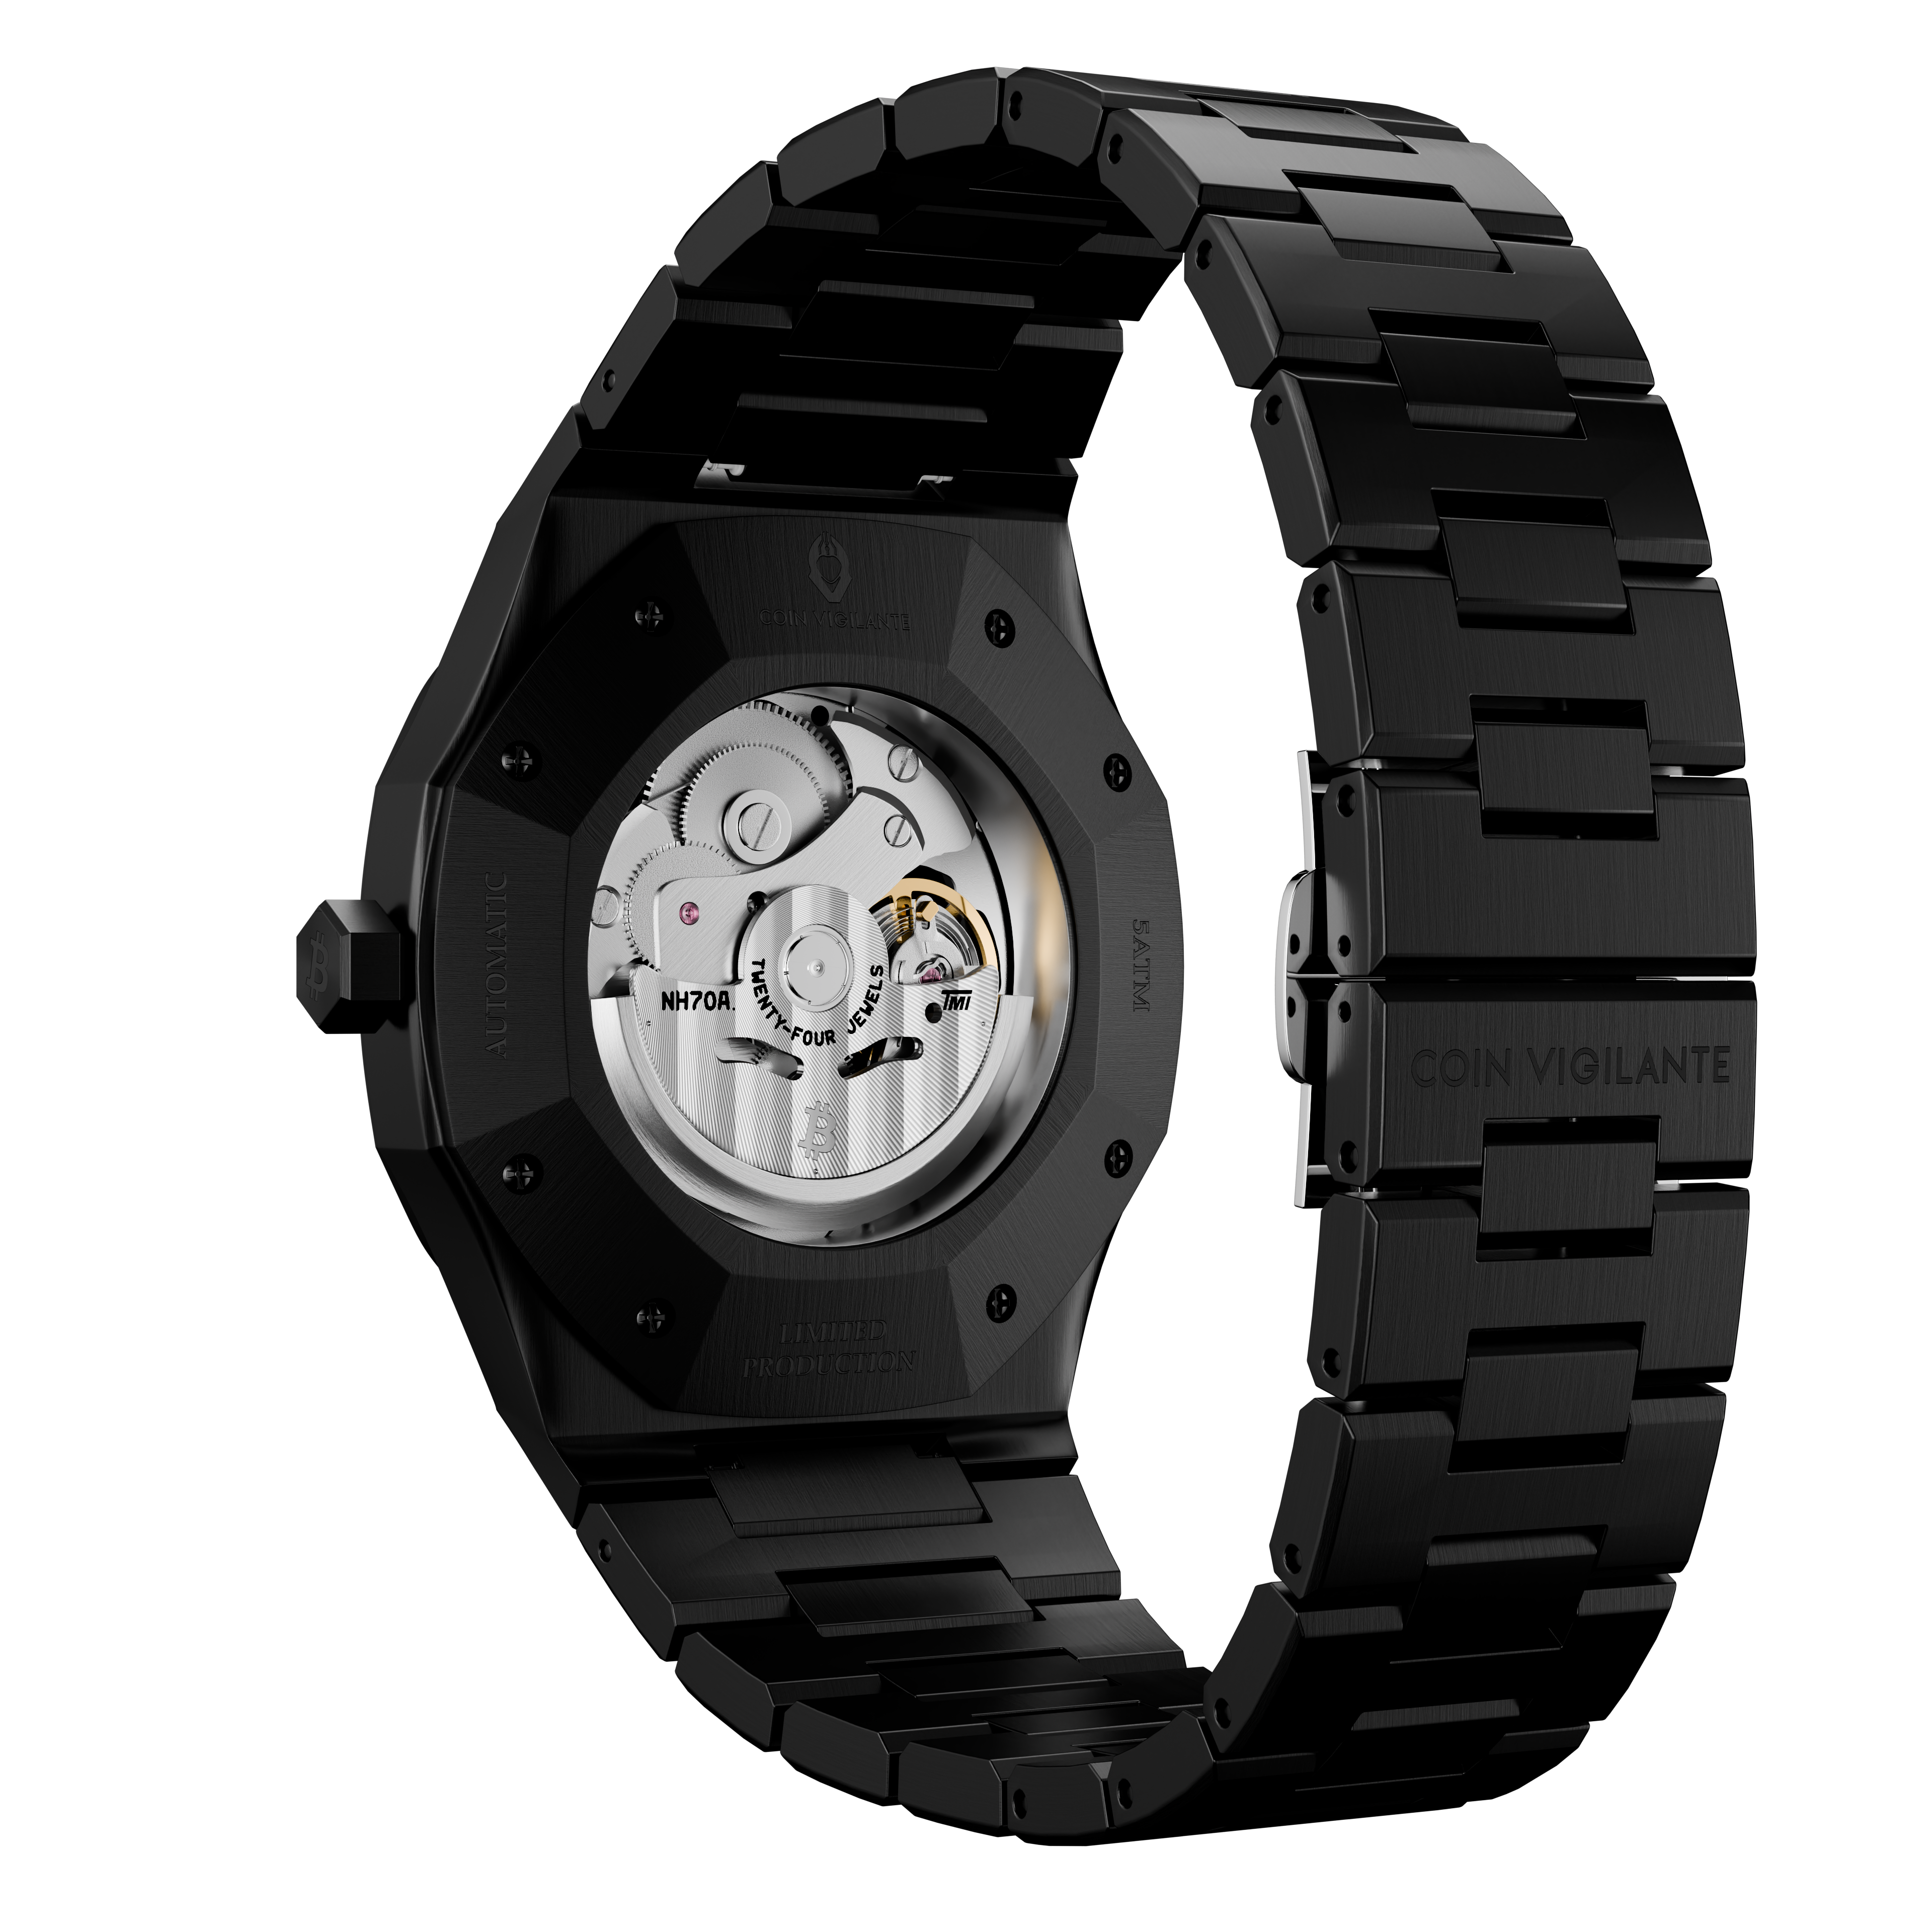 NEW: Bitcoin Transparency Edition Watch - All Black